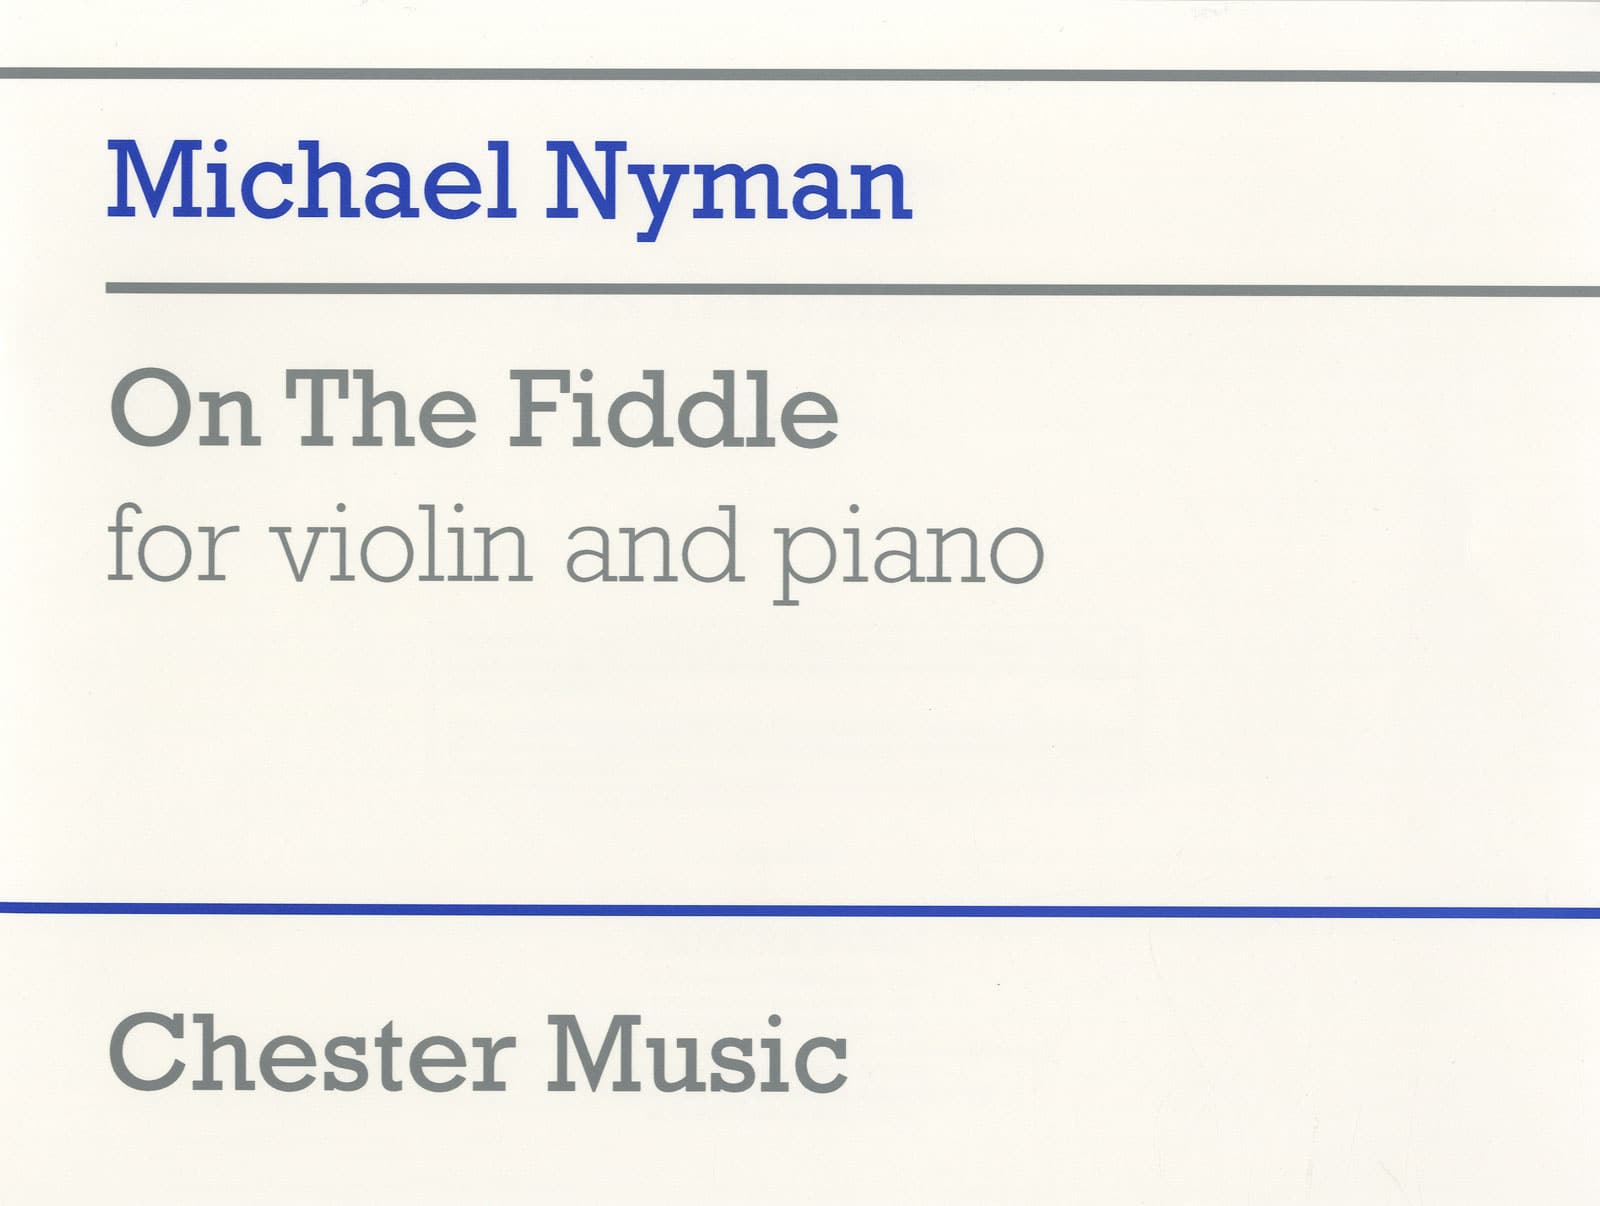 CHESTER MUSIC NYMAN MICHAEL - ON THE FIDDLE - VIOLON & PIANO